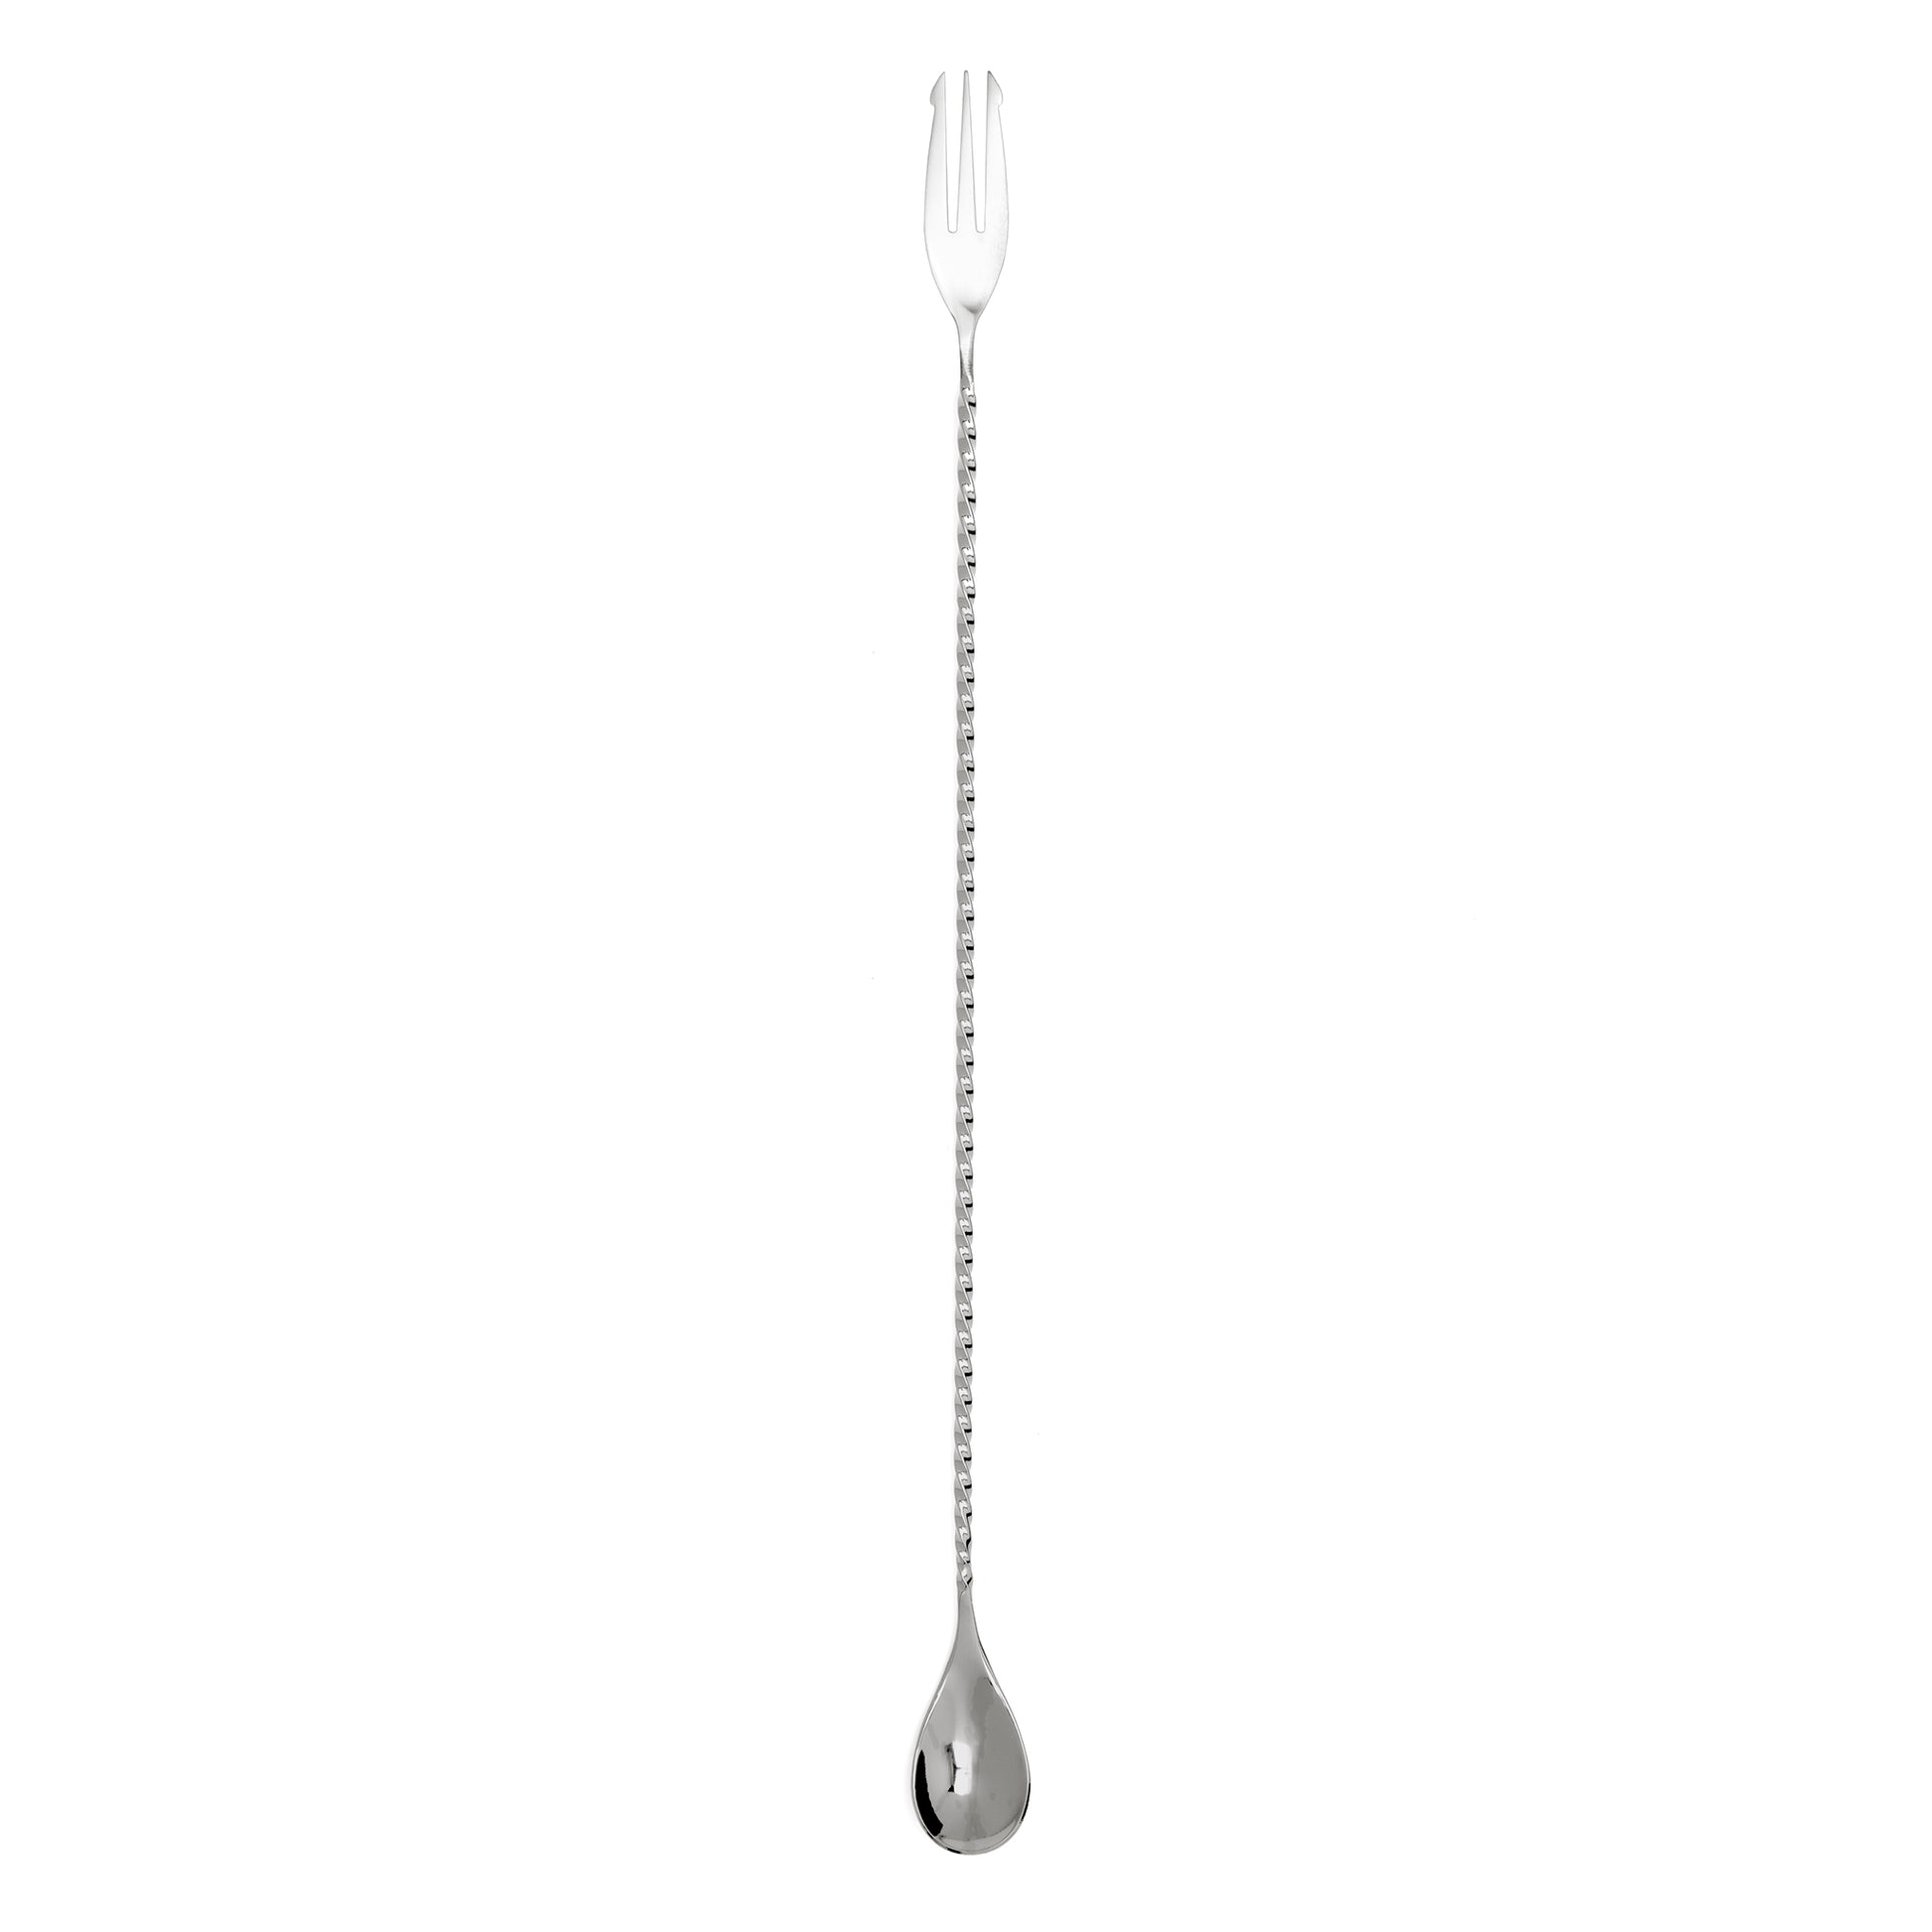 TRIDENT BARSPOON / SILVER-PLATED / 40cm